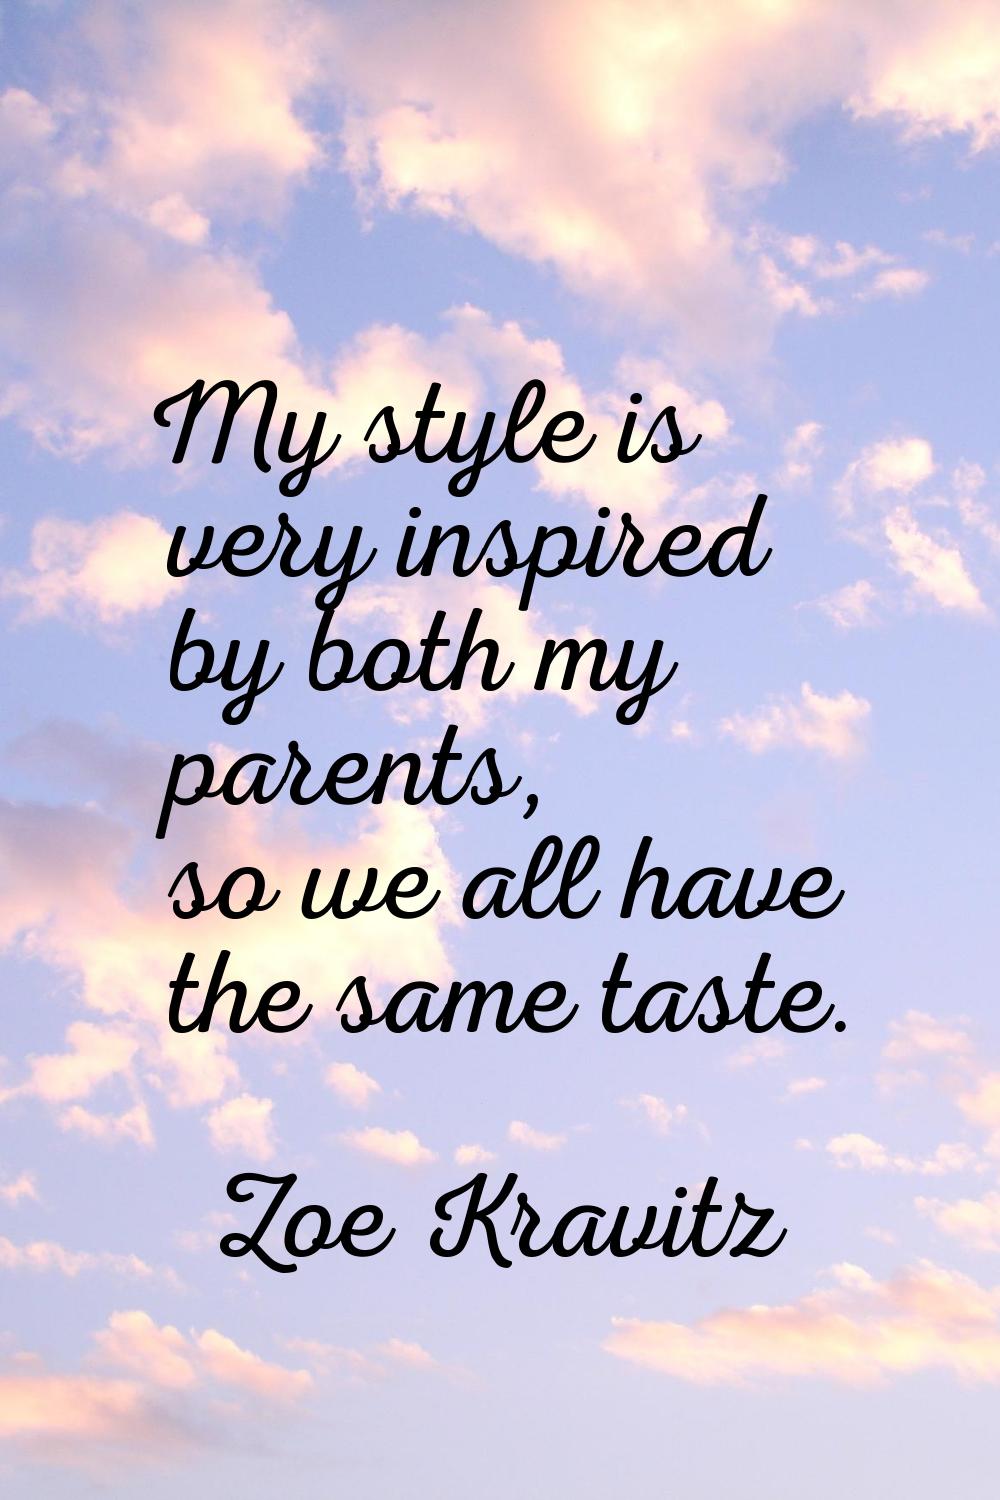 My style is very inspired by both my parents, so we all have the same taste.